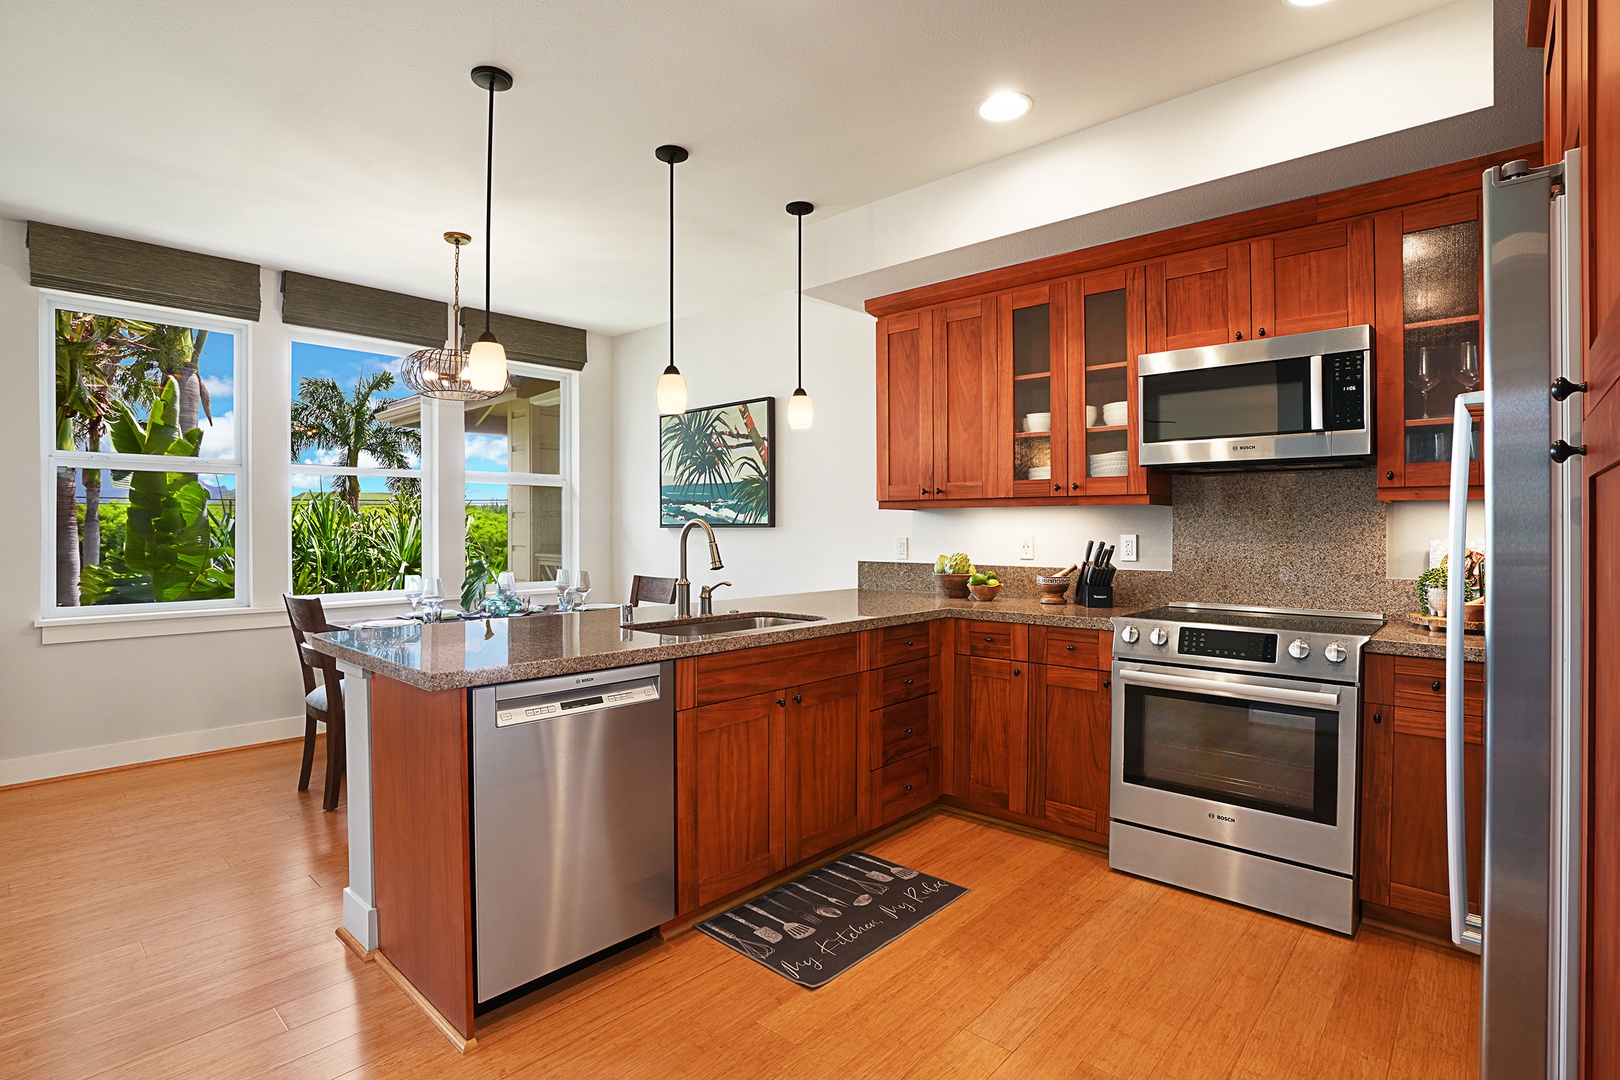 Koloa Vacation Rentals, Pili Mai 15G - Open-concept living and dining space flowing into a kitchen with an island breakfast bar and quality stainless steel appliances.